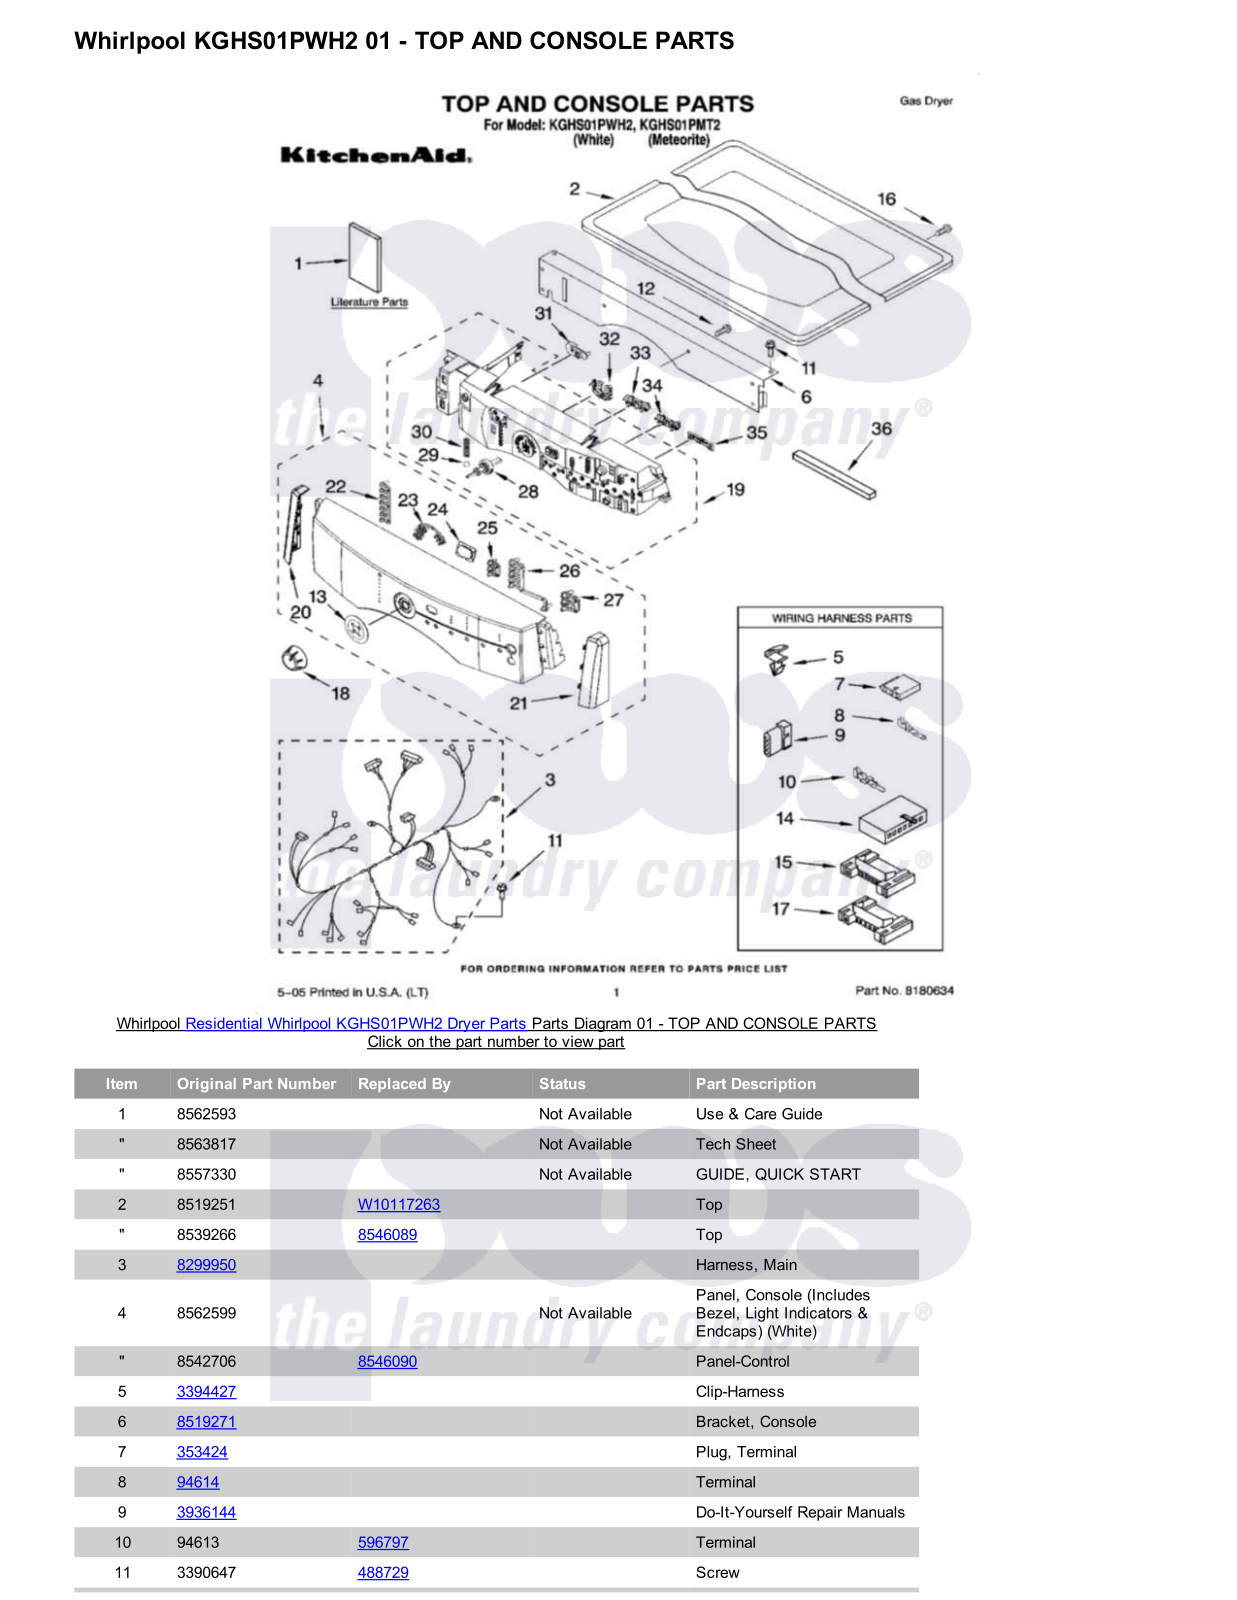 Whirlpool KGHS01PWH2 Parts Diagram